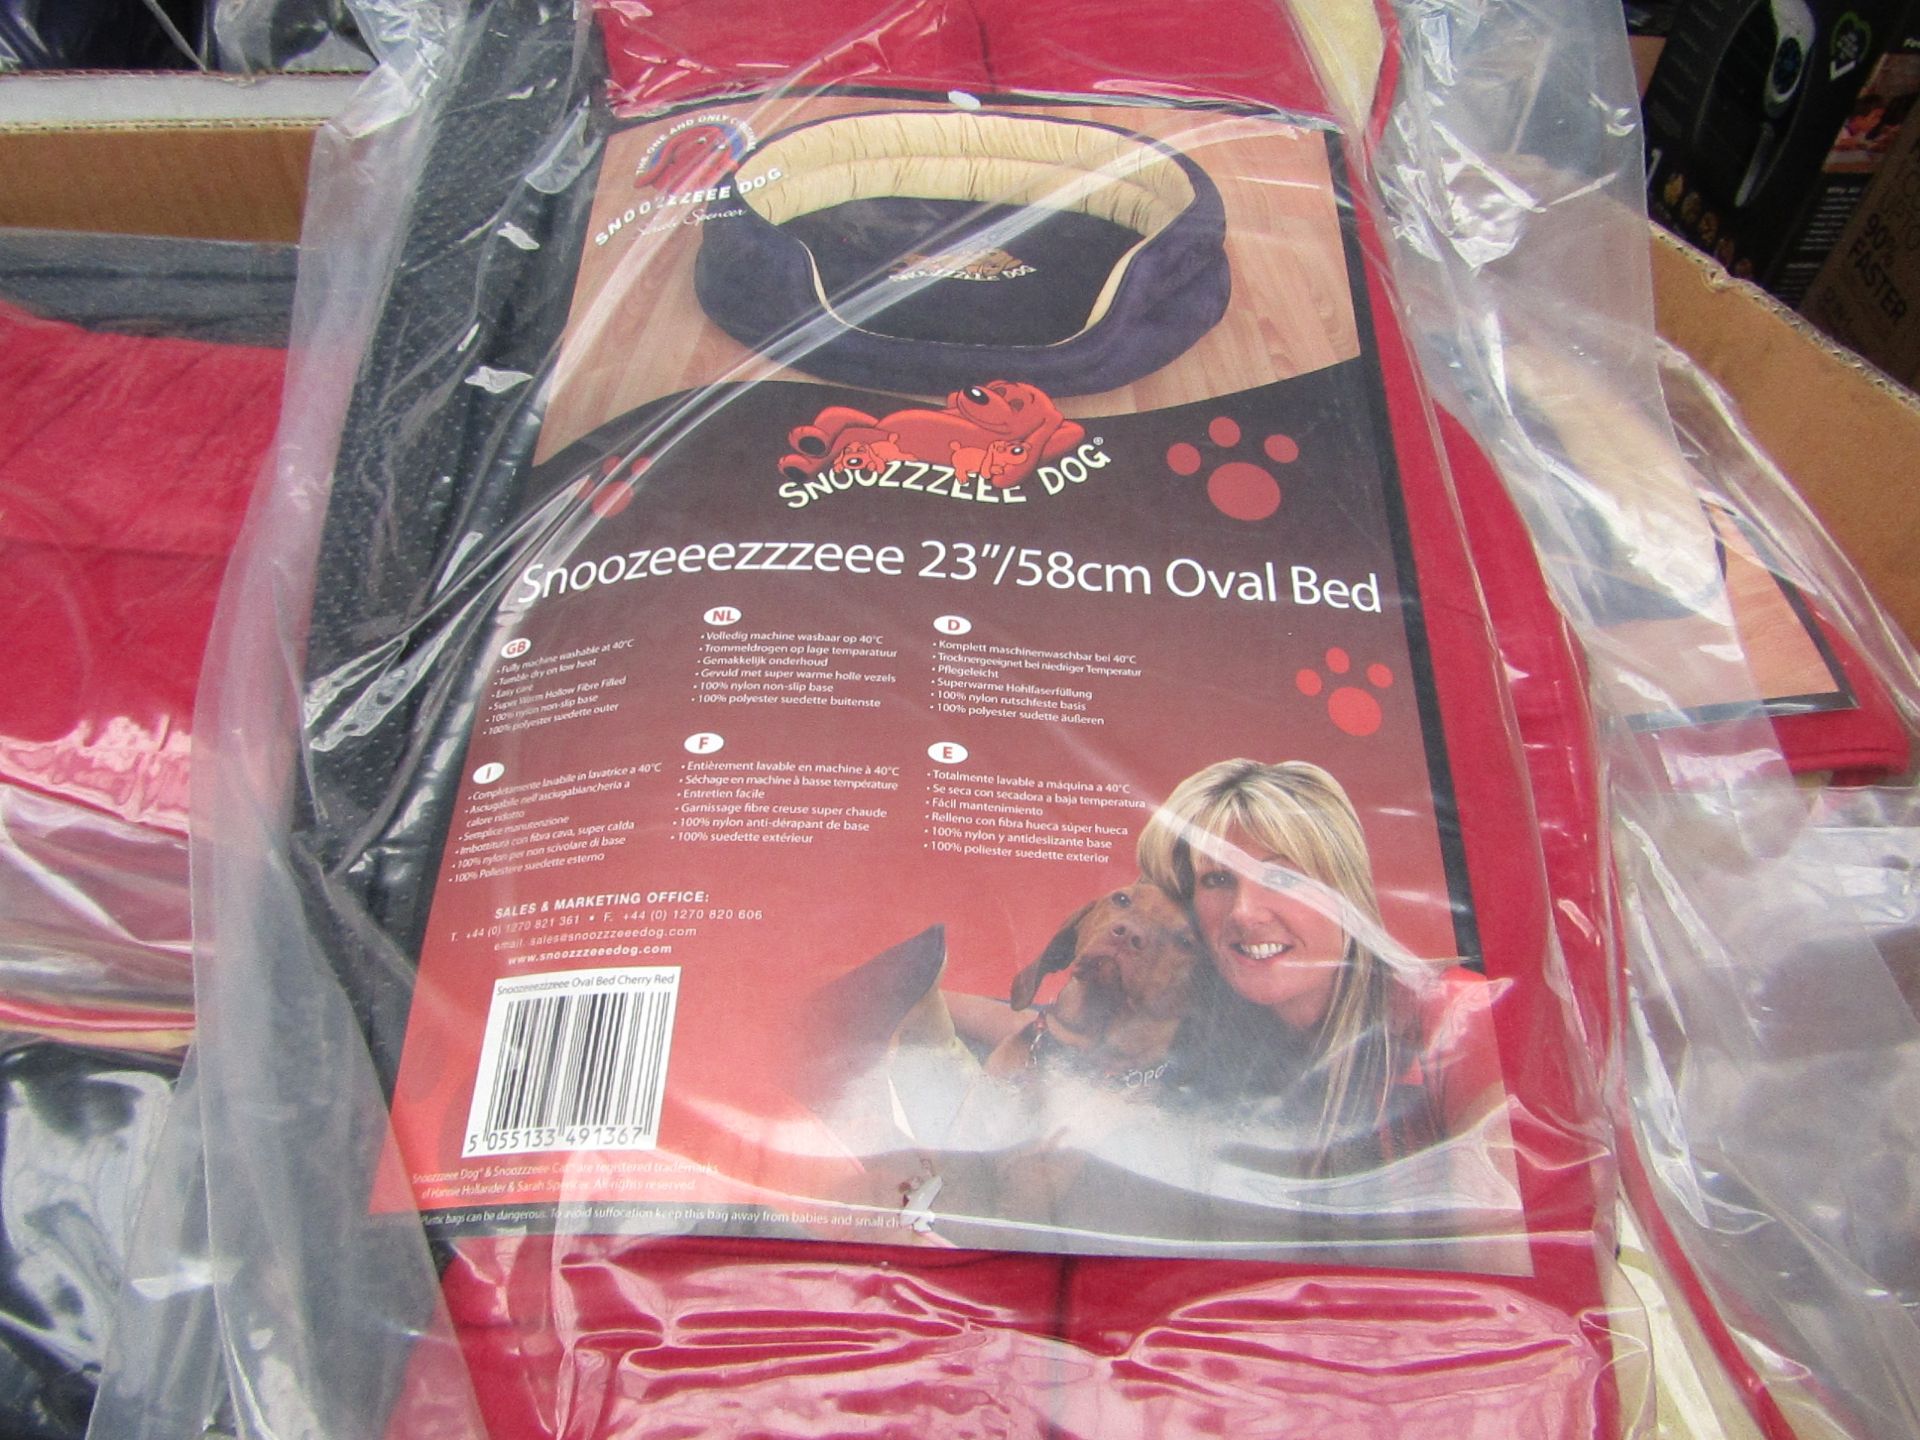 5x Snoozzzeee Dog - Oval Cherry Red Dog Bed (23"/58cm) - All New & Packaged.